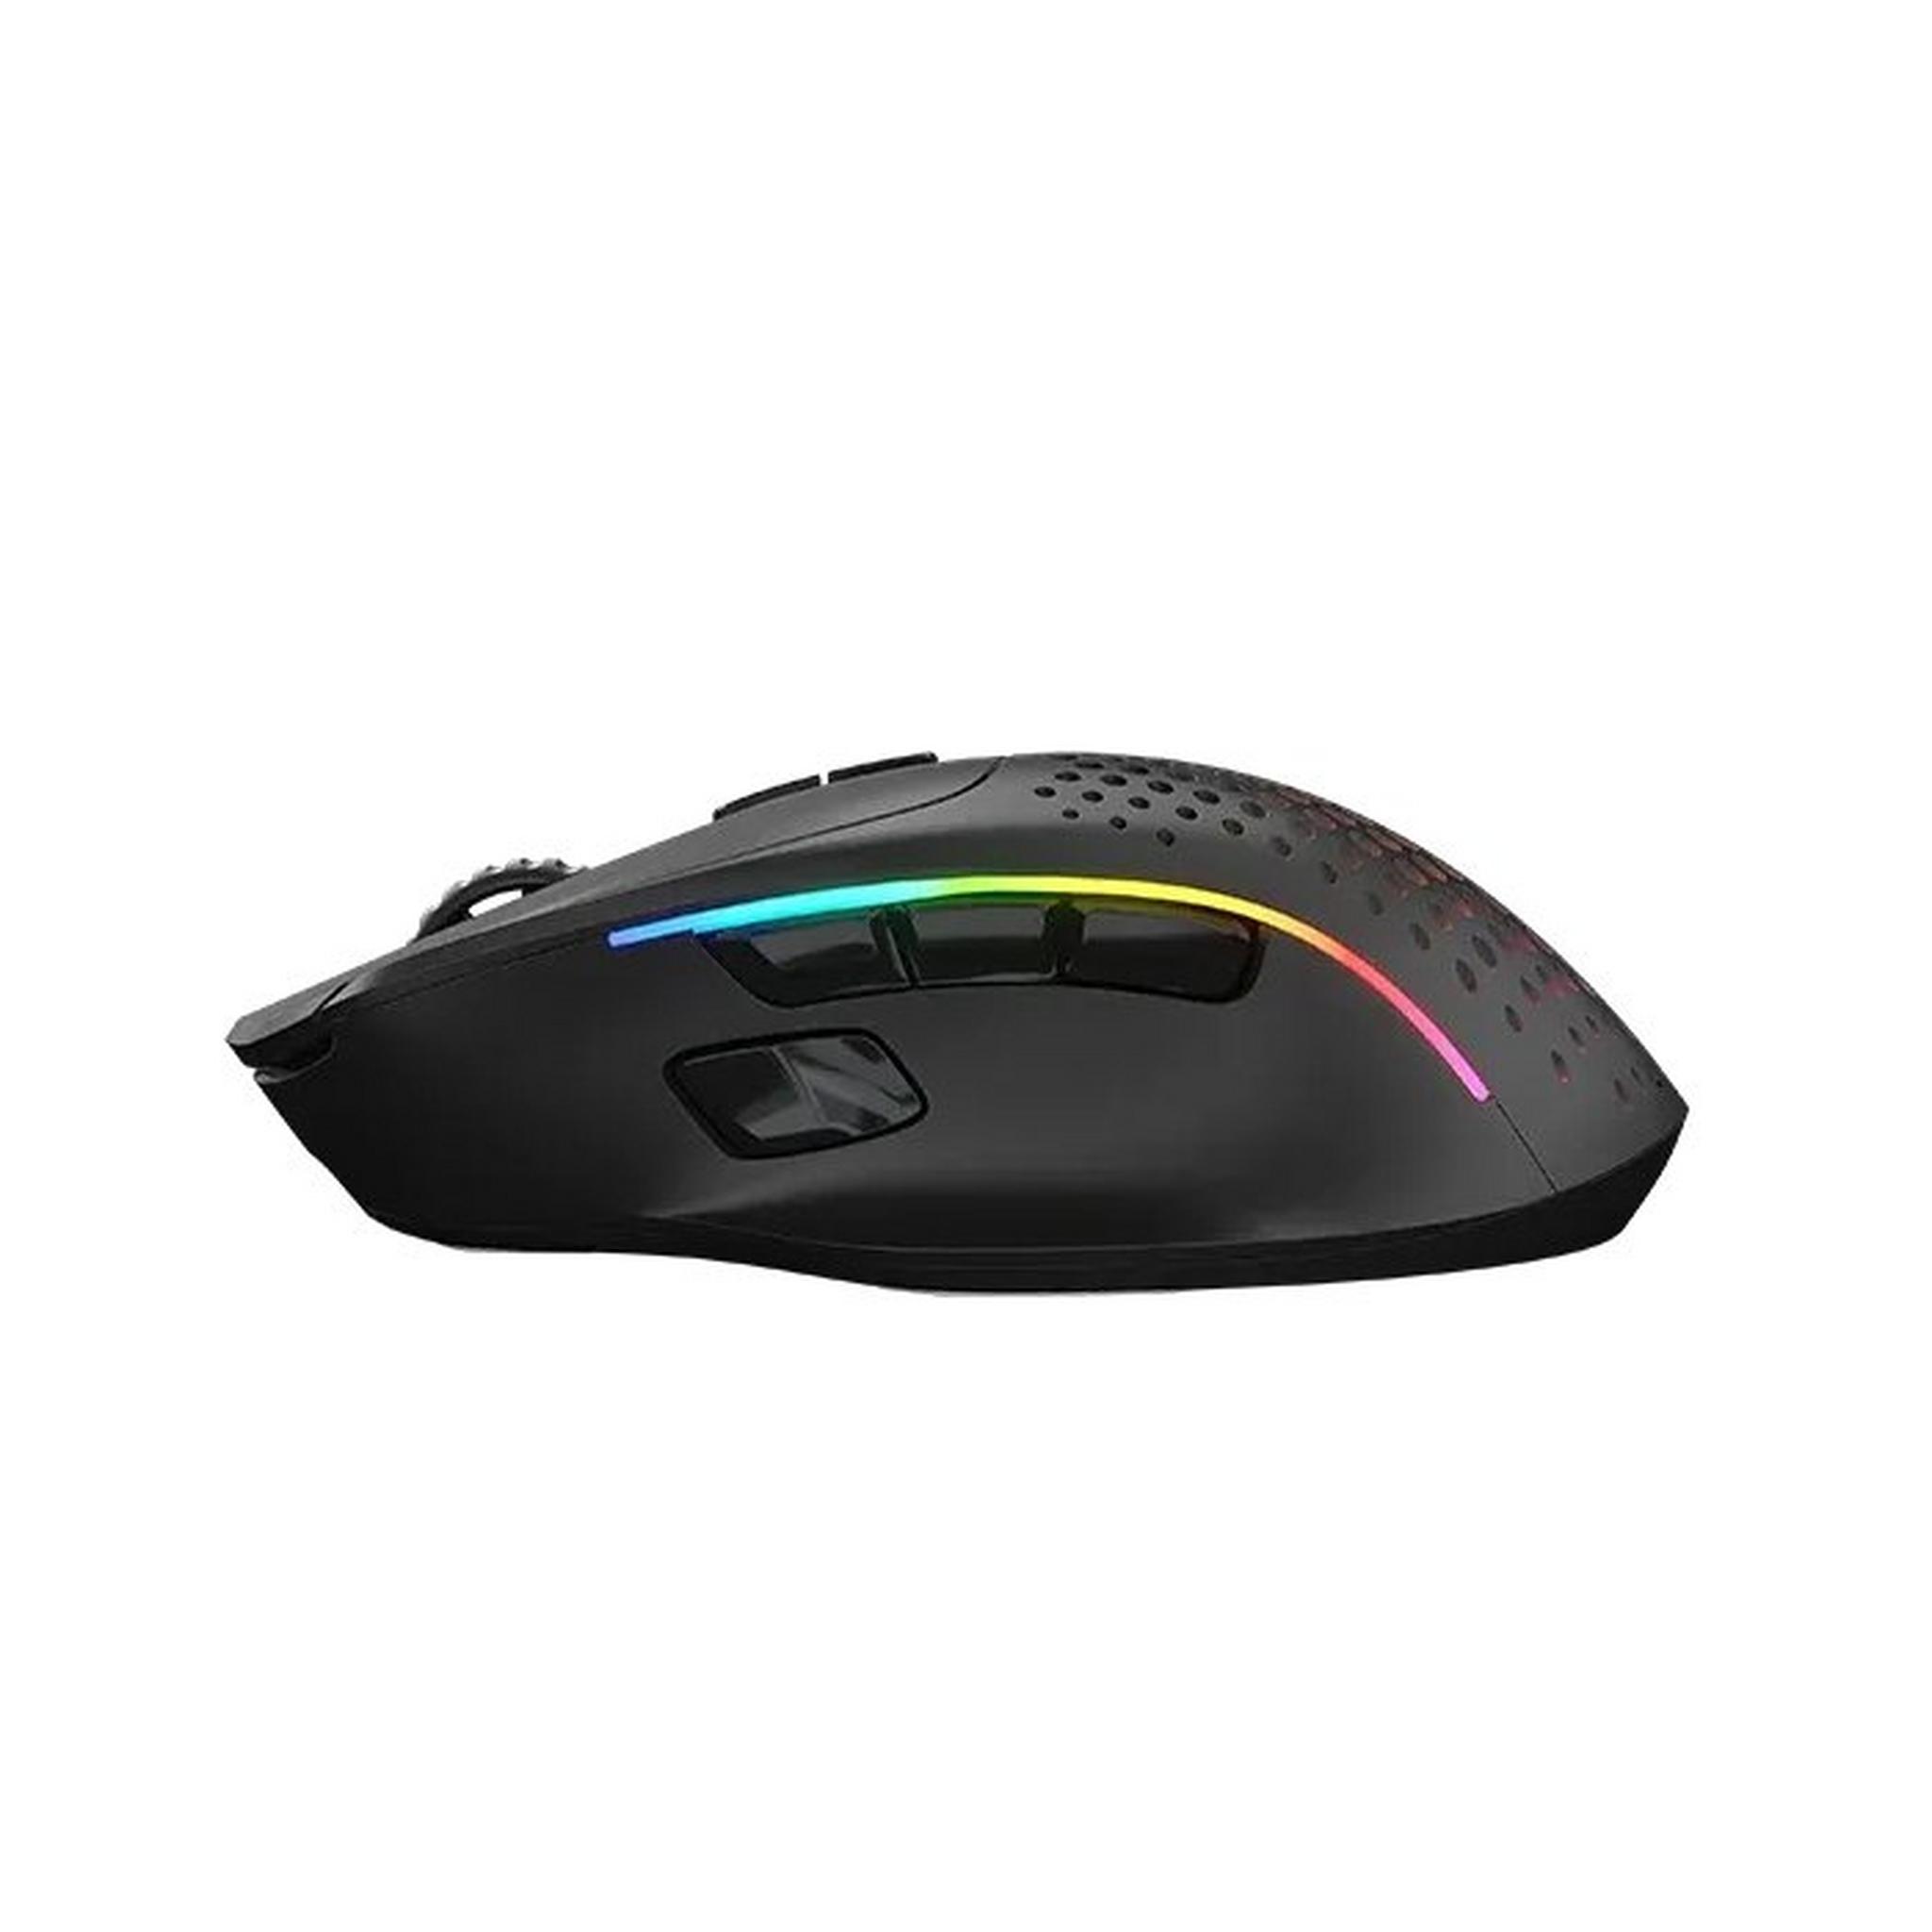 Glorious Model I 2 Wireless Gaming Mouse - Black